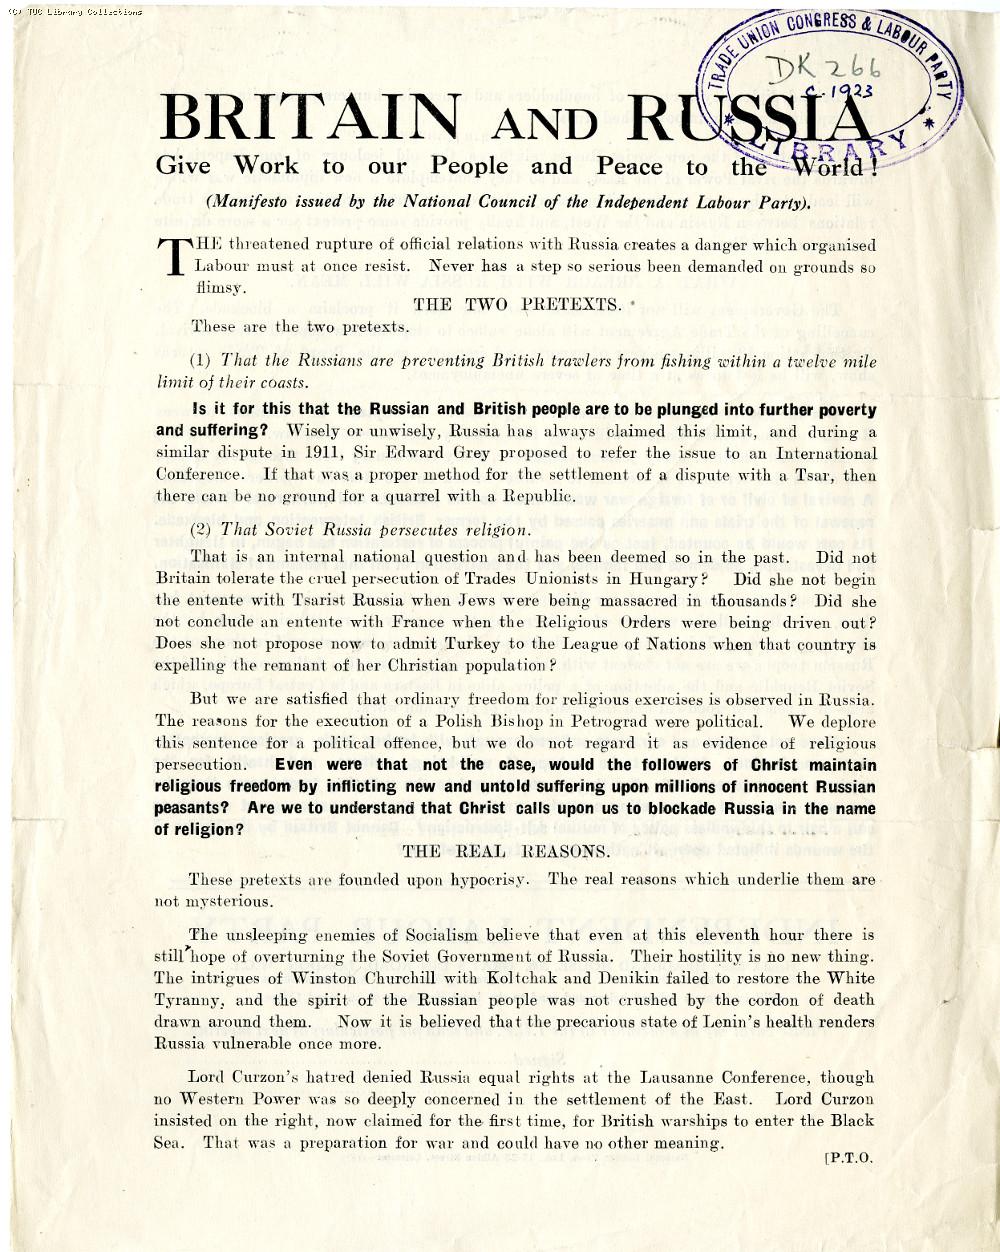 Independent Labour Party leaflet on Russia, 1923